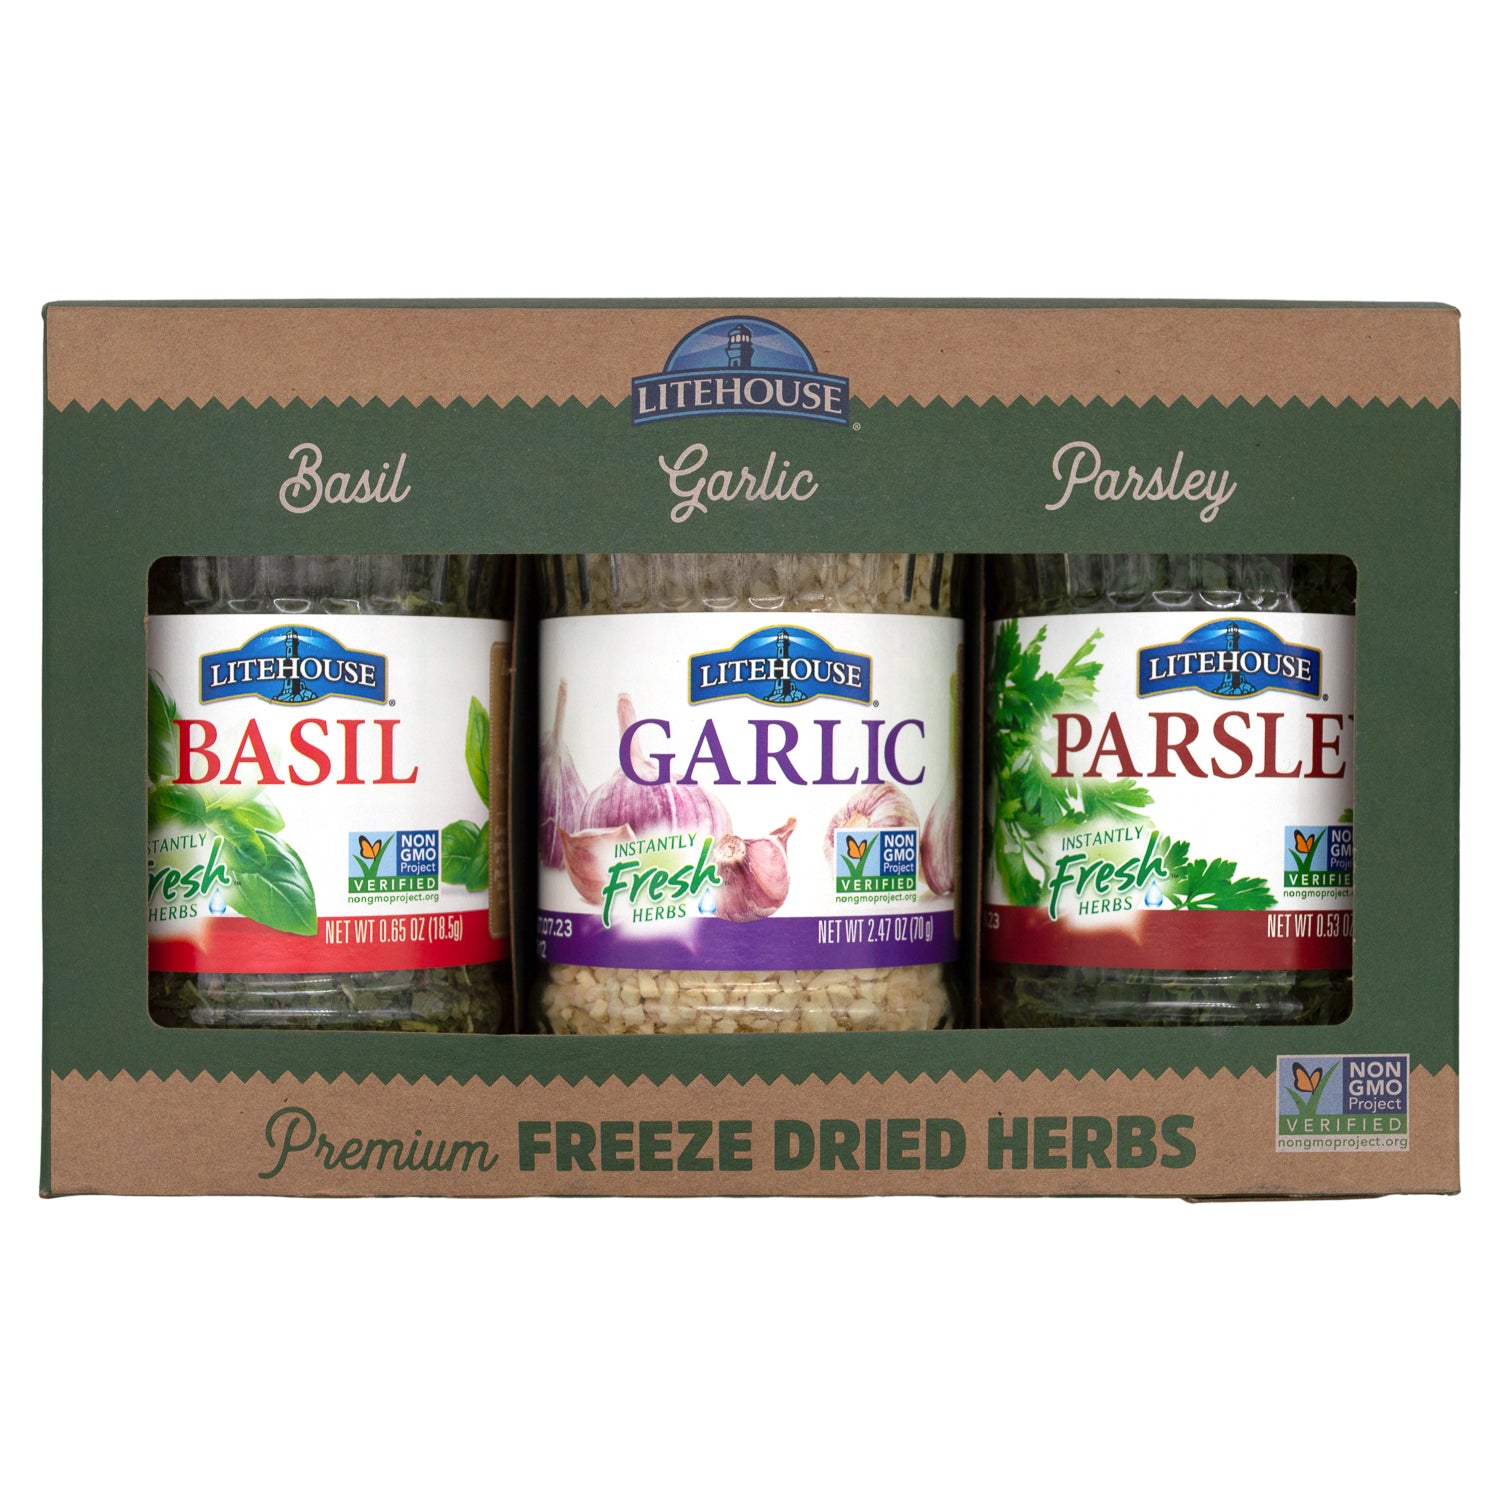 Litehouse Premium Freeze Dried Herbs Litehouse Variety 3.65 Ounce 